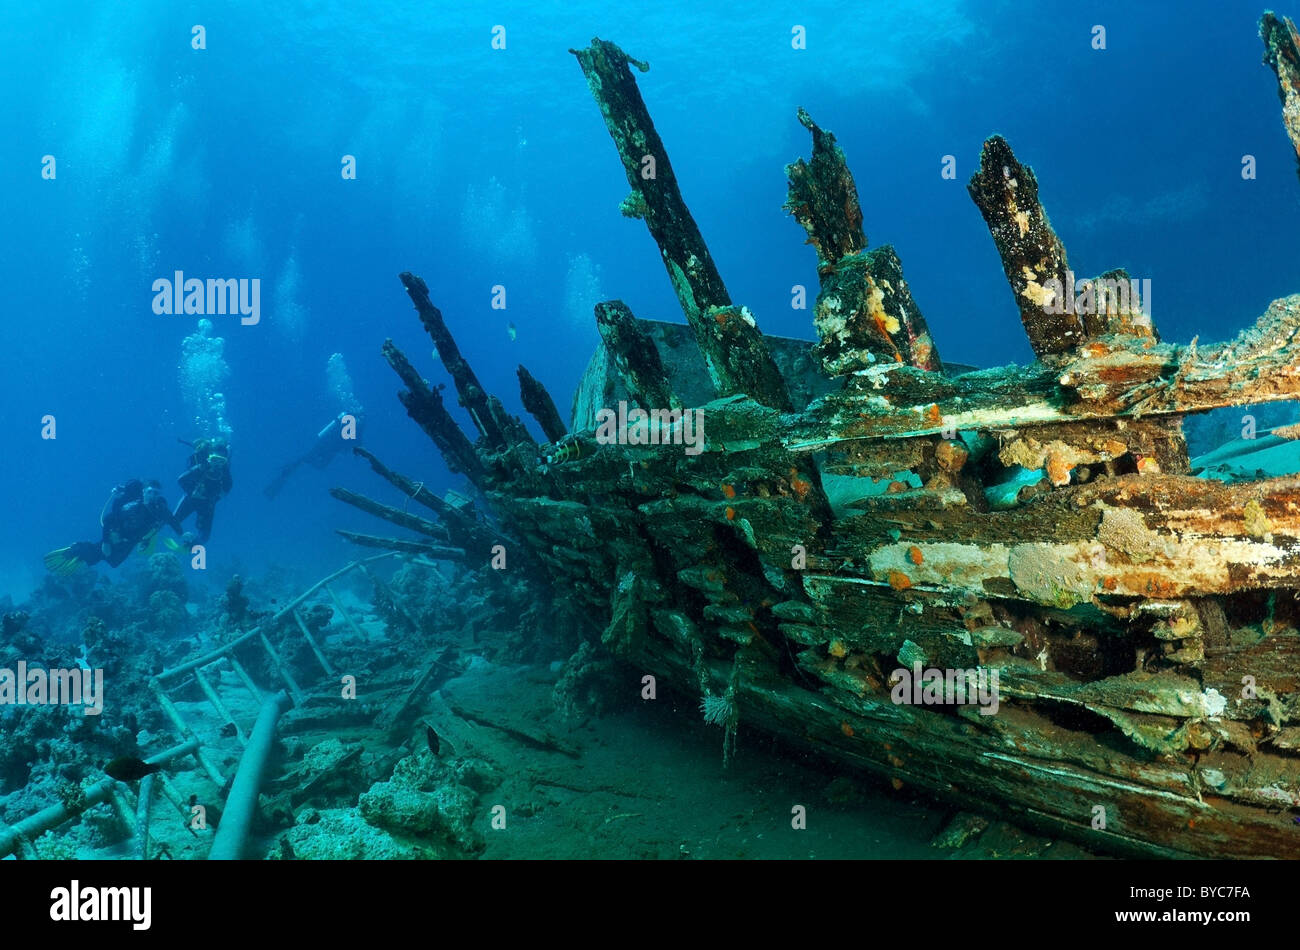 Group of scuba divers on wooden wreeckship. Divers inspects the skeleton of a wooden vessel Stock Photo